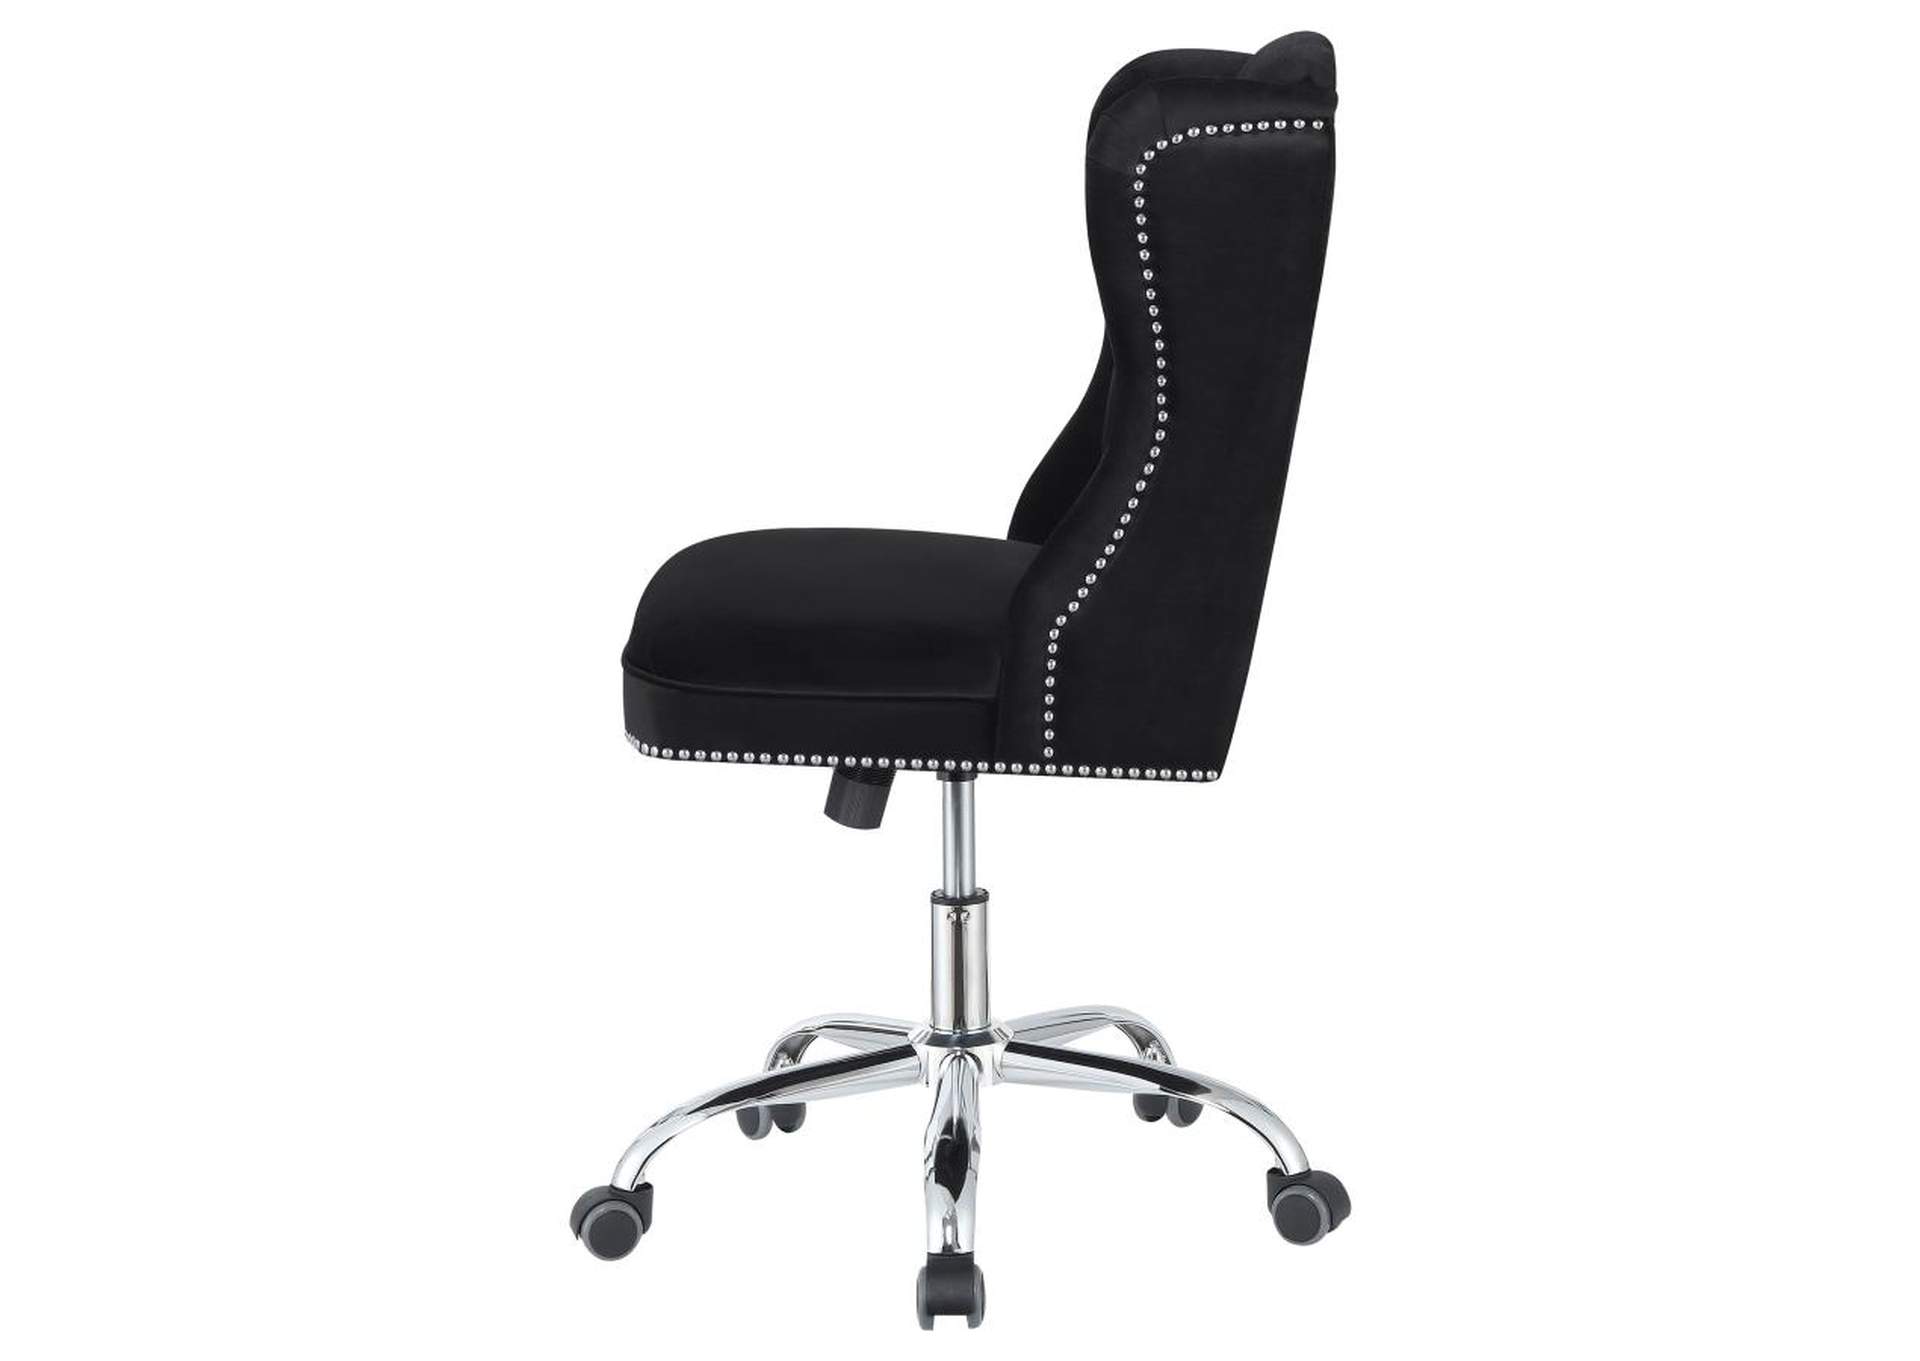 Julius Upholstered Tufted Office Chair Black and Chrome,Coaster Furniture